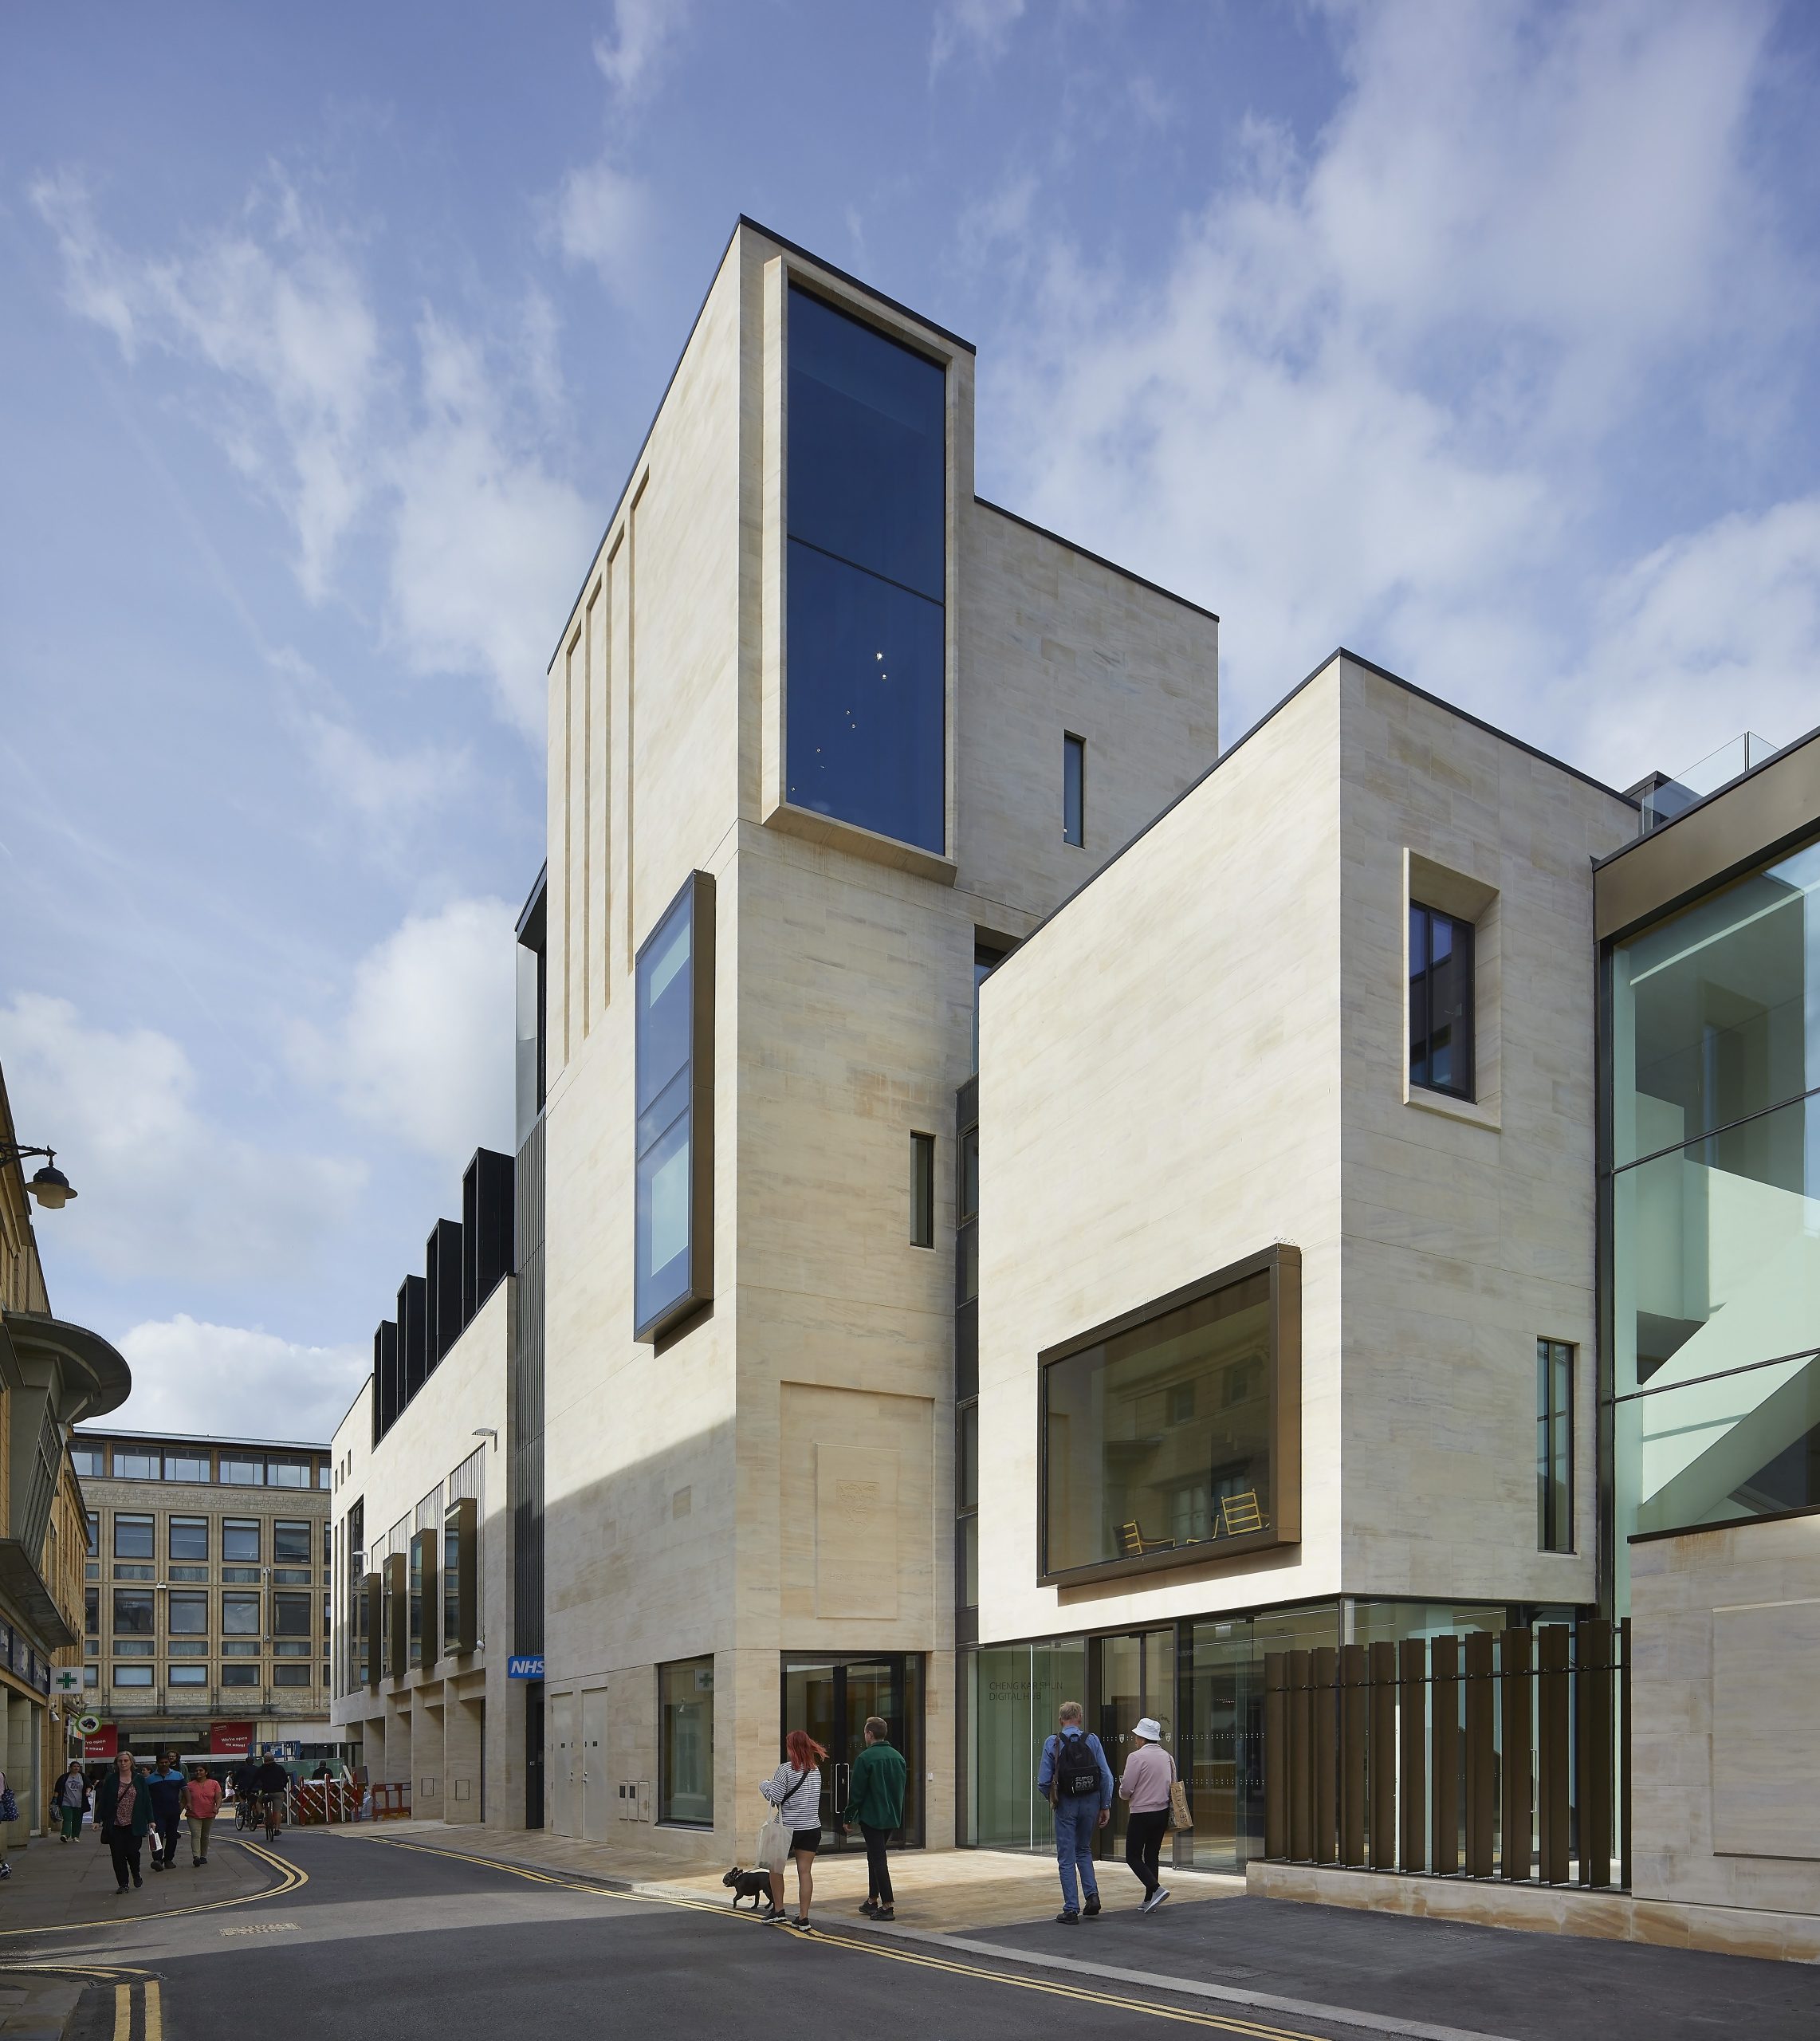 The Cornmarket facade of Jesus College's Cheng Yu Tung Building, designed by MICA Architects. Image shows corner of pale cream stone building with multiple windows and people walking along at ground level Credit: Hufton + Crow